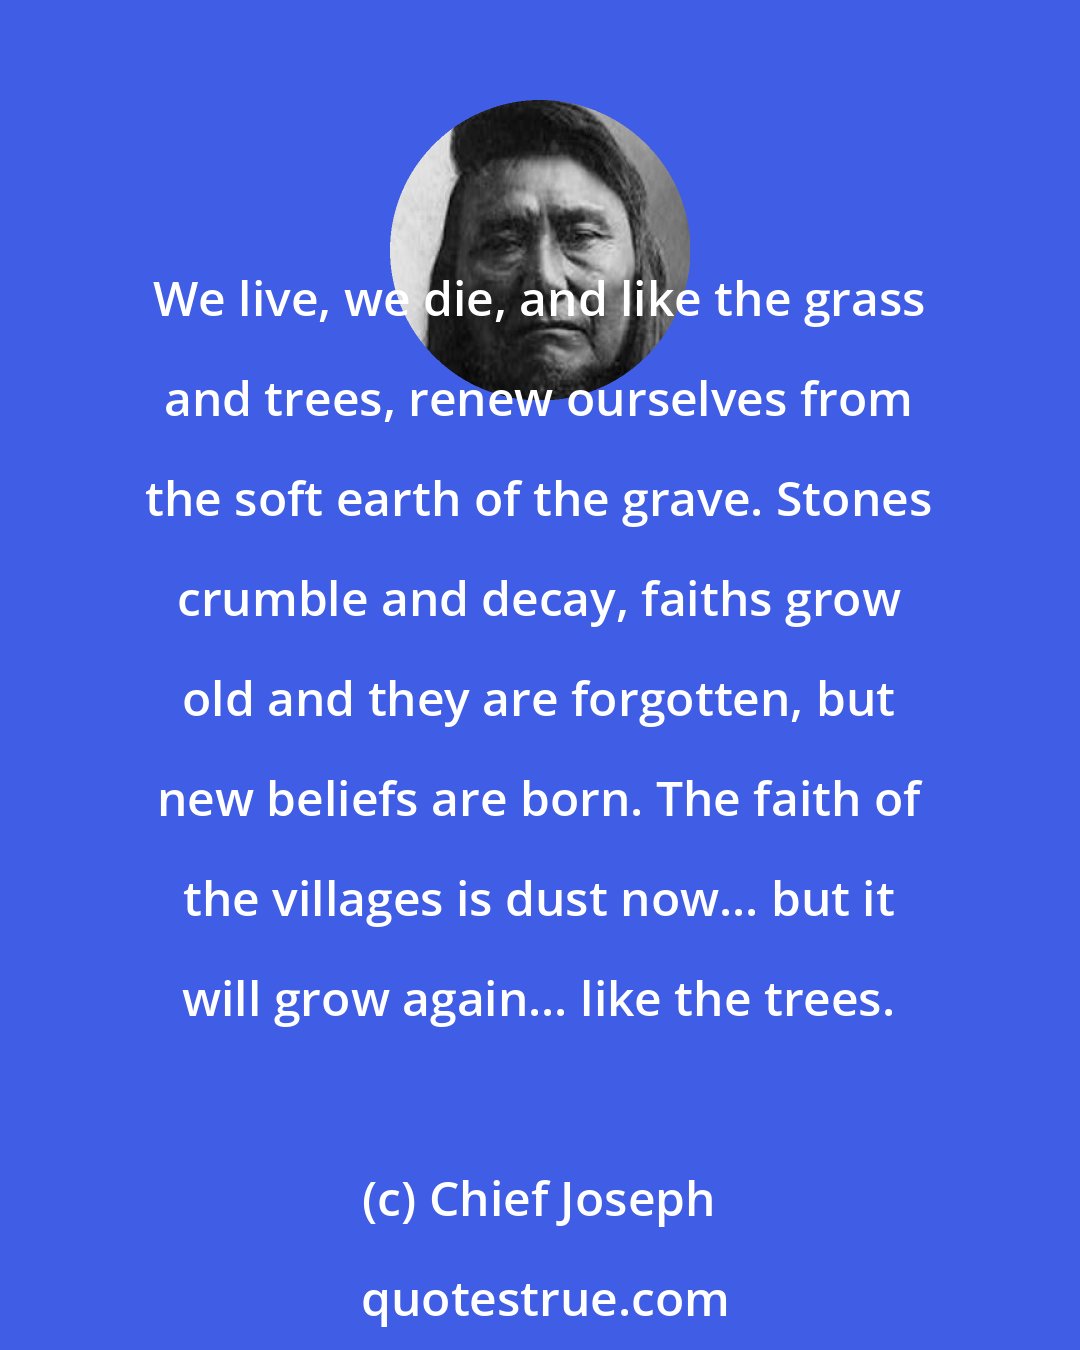 Chief Joseph: We live, we die, and like the grass and trees, renew ourselves from the soft earth of the grave. Stones crumble and decay, faiths grow old and they are forgotten, but new beliefs are born. The faith of the villages is dust now... but it will grow again... like the trees.